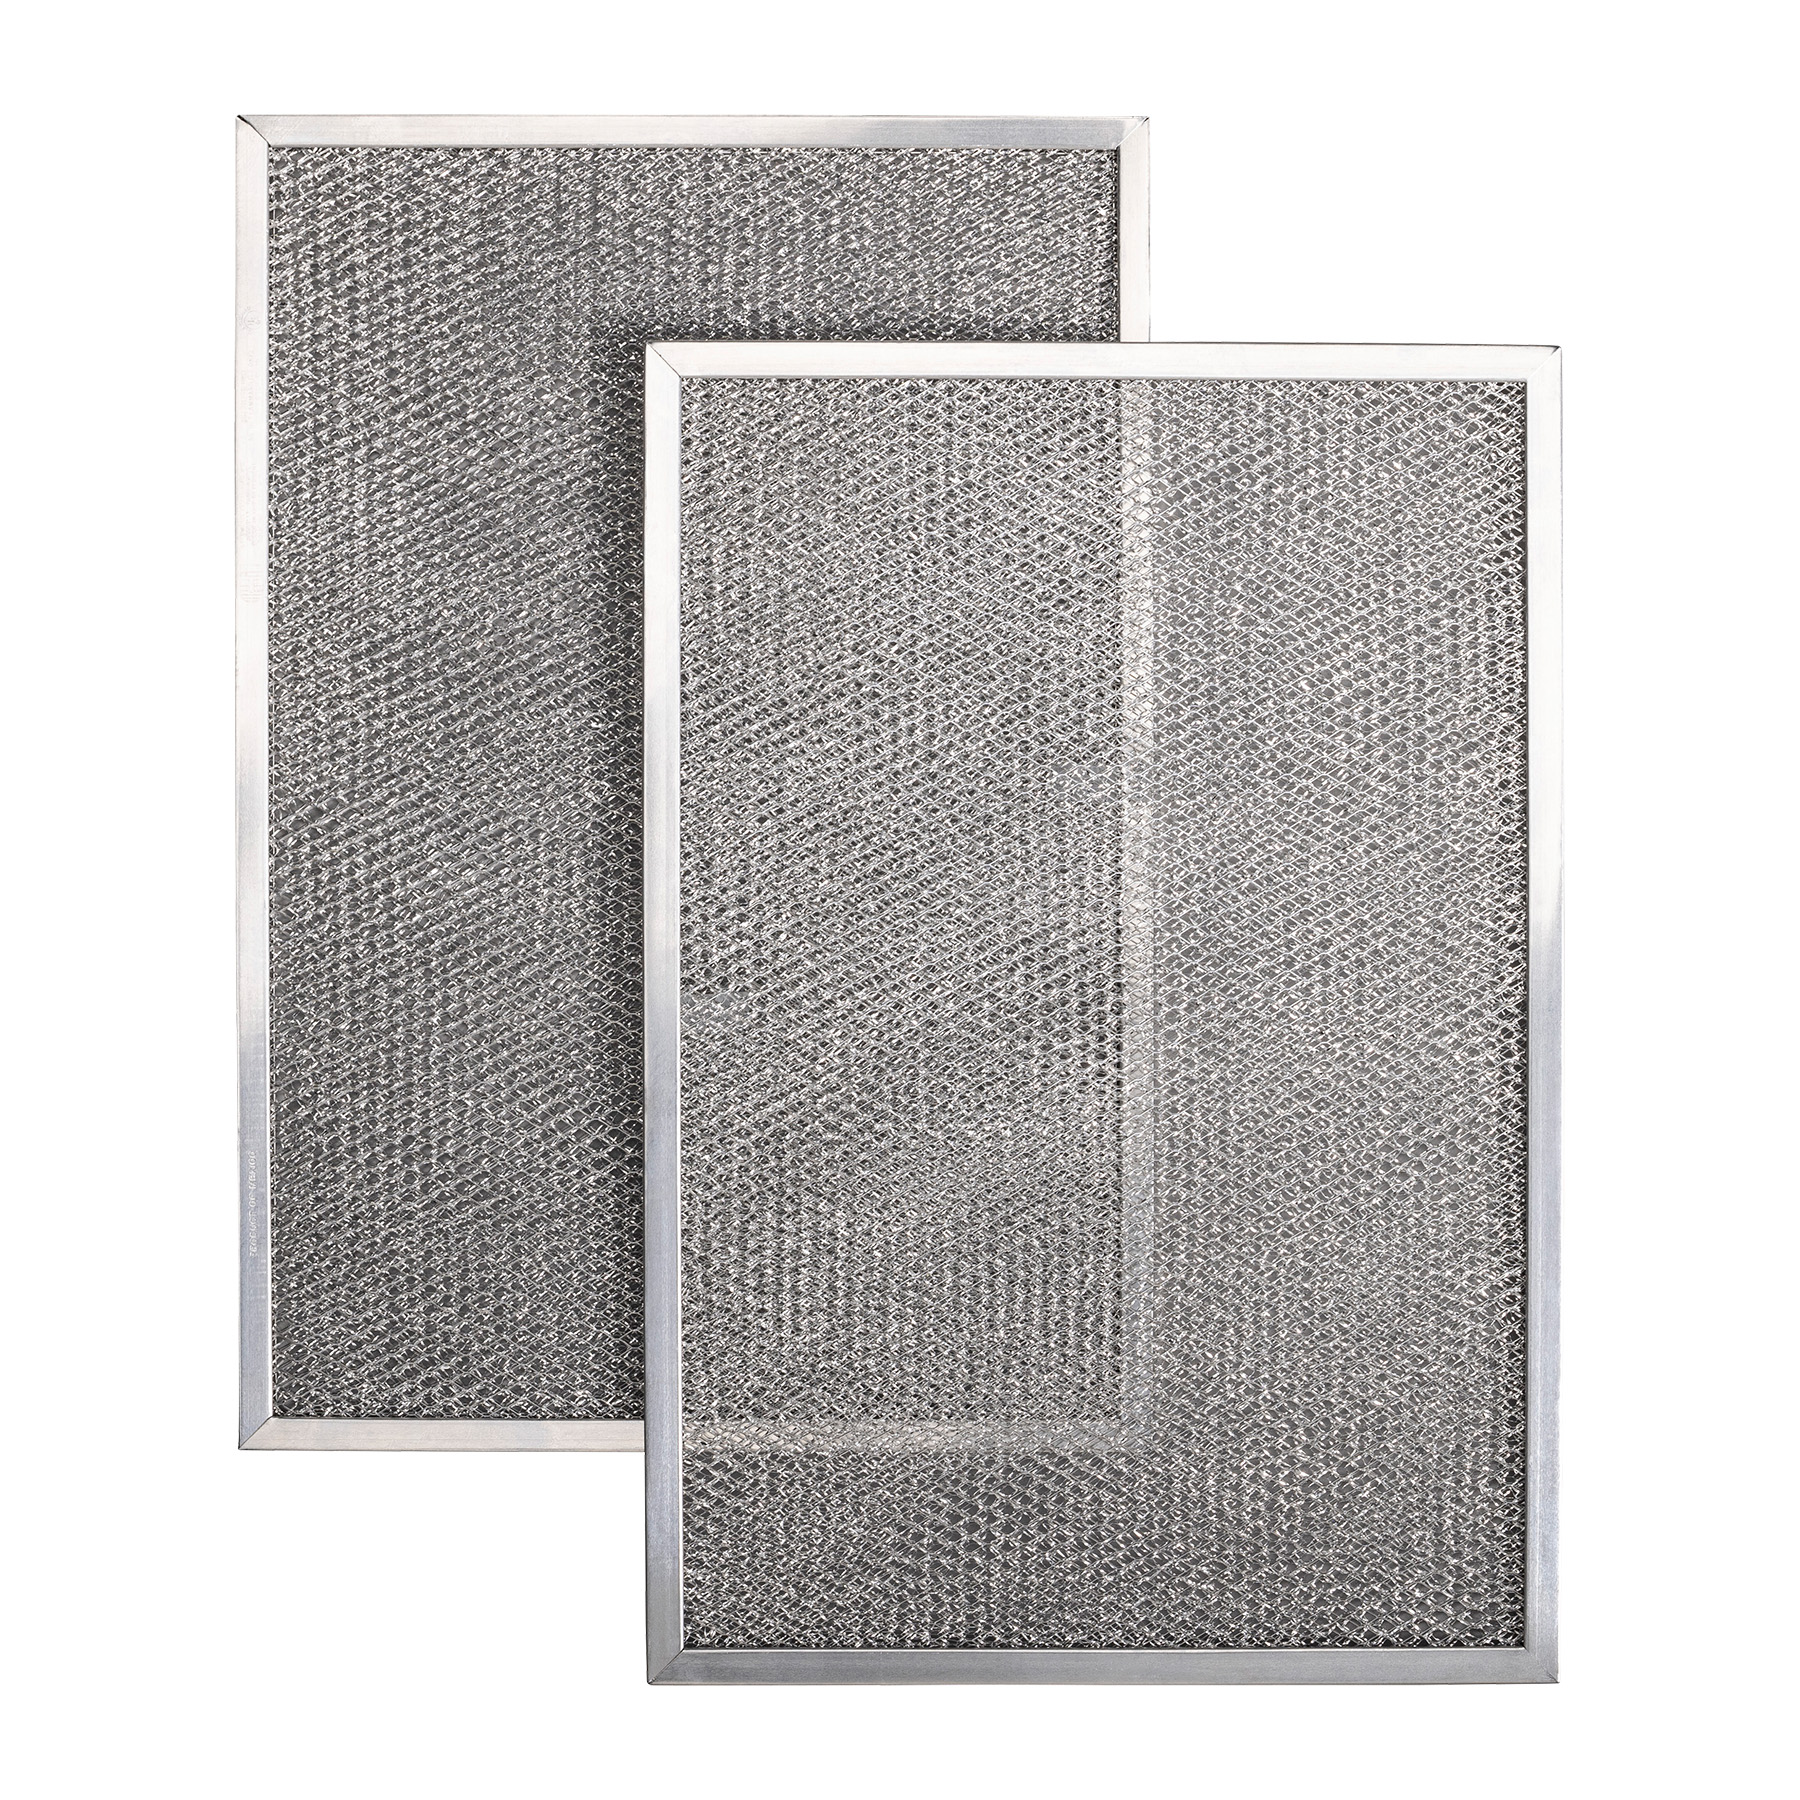 Broan-NuTone® Genuine Replacement Aluminum Filter for Range Hoods, 17-1/4" x 11-13/16", Fits Select Models, (2-Pack)